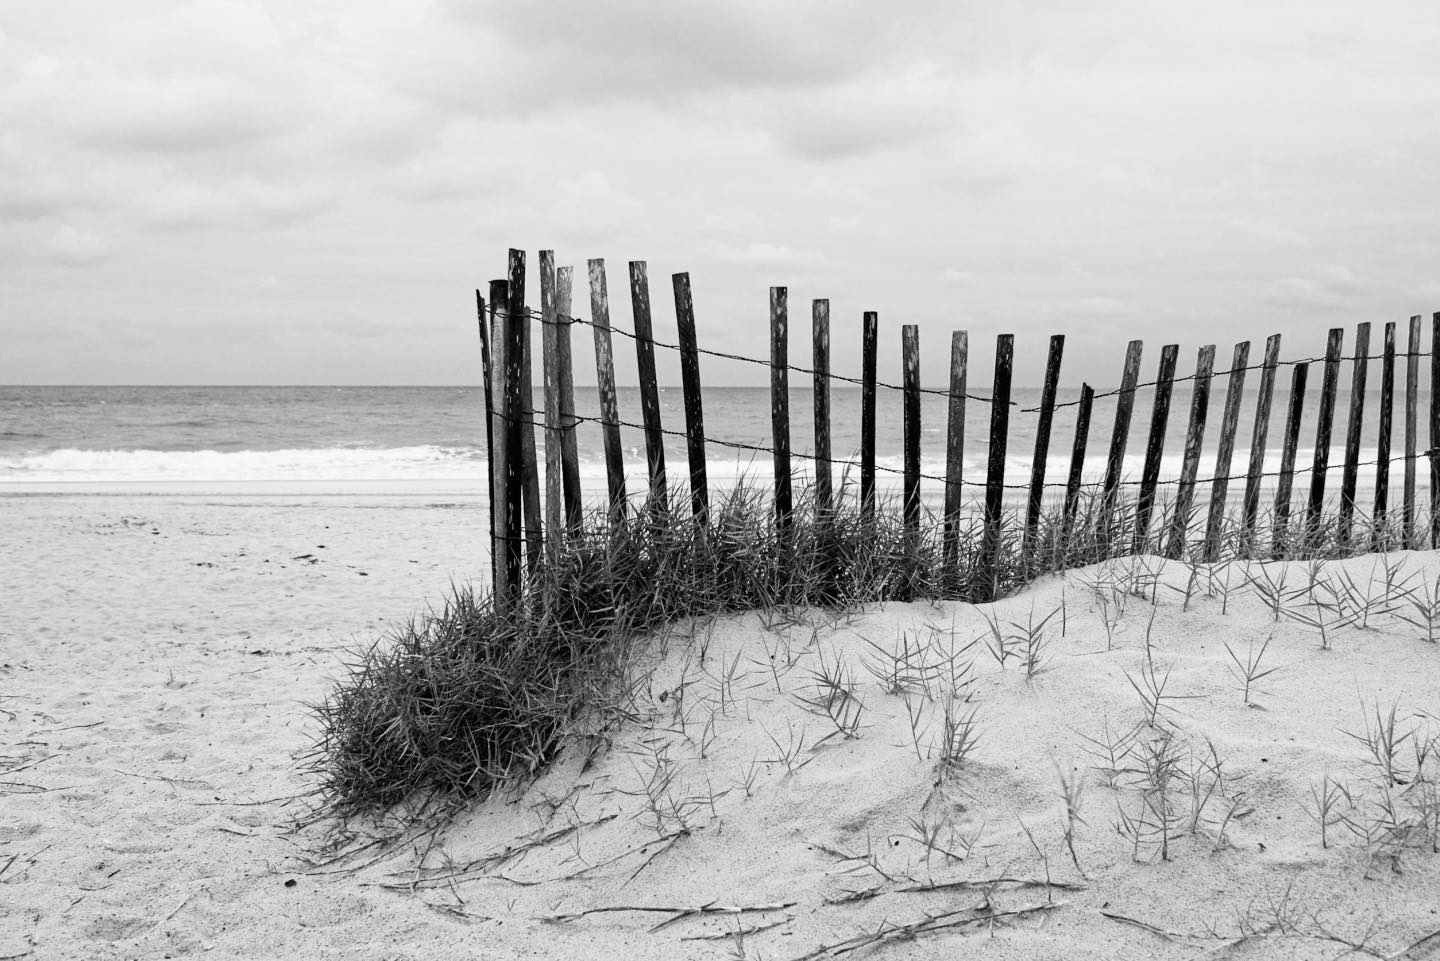 Other than a great compositional addition to my photo, what is the purpose of a small section of fence on a beach?